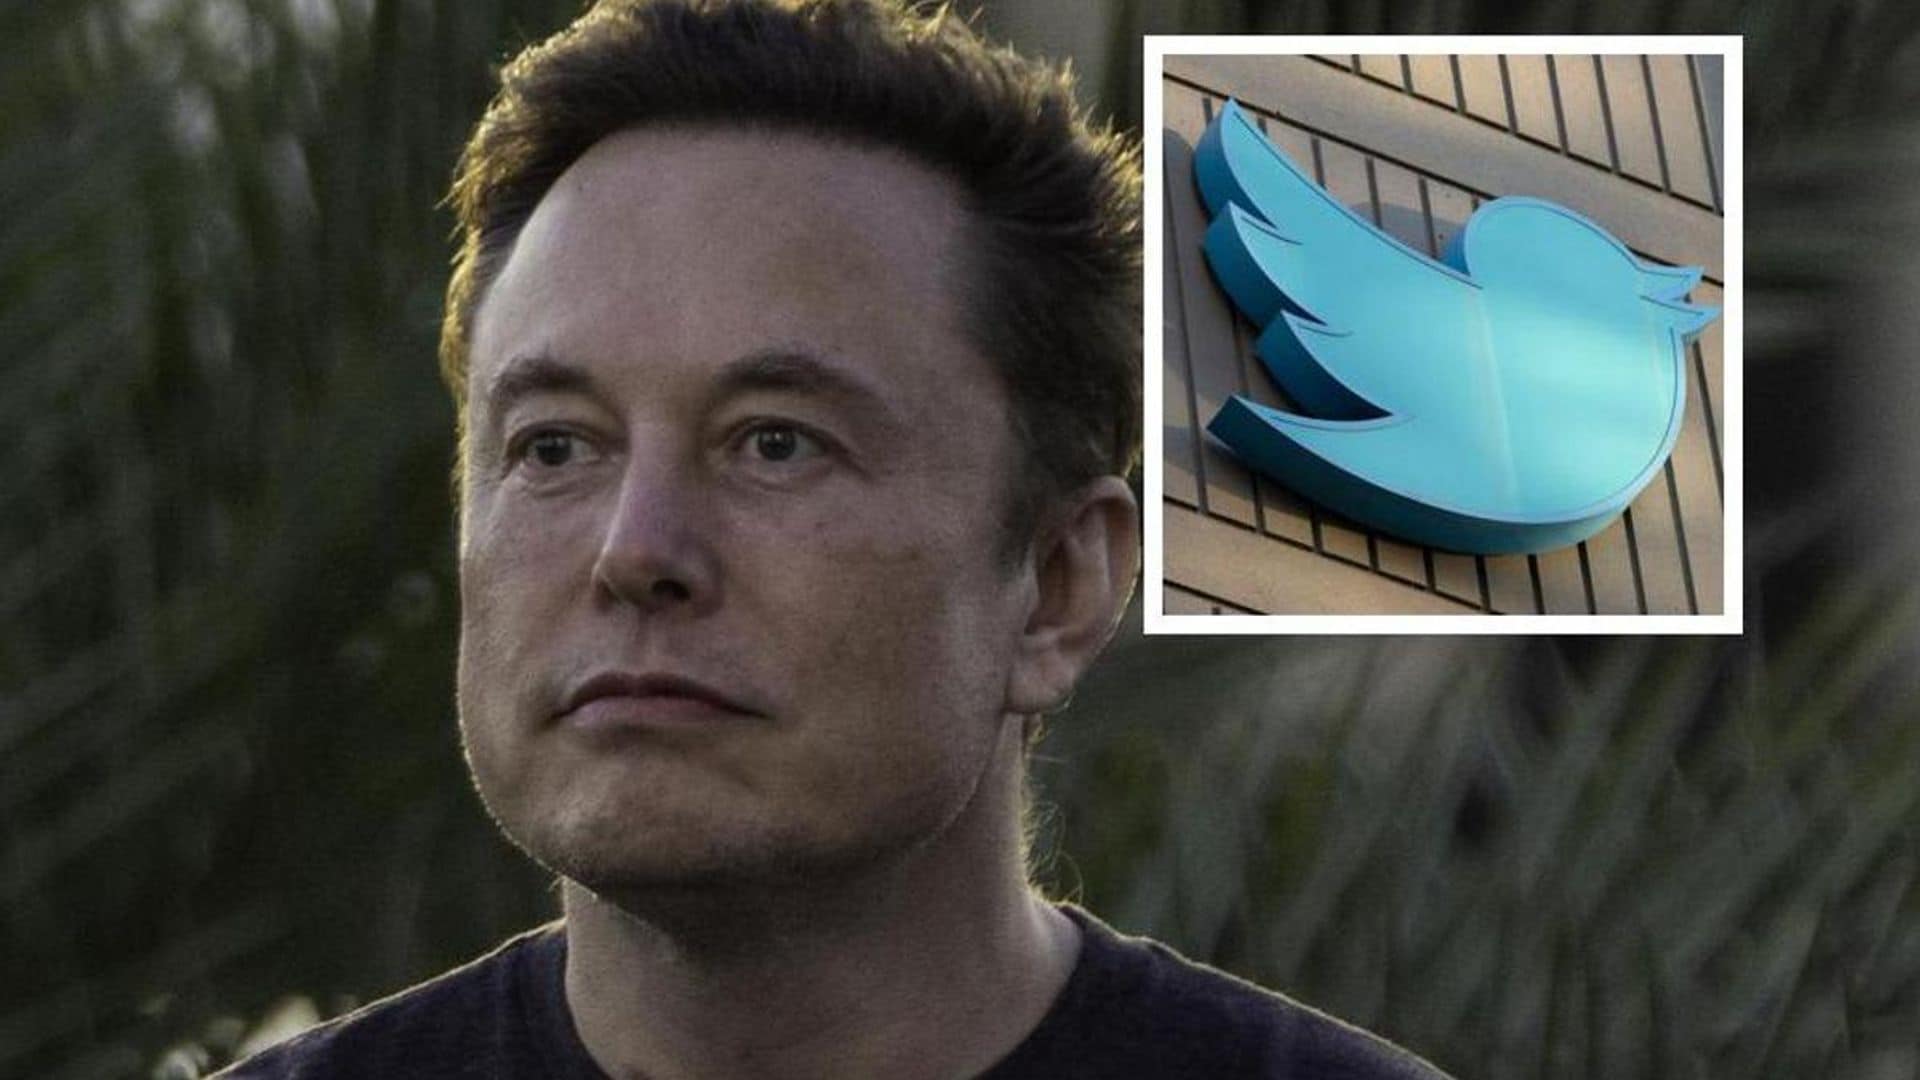 Elon Musk takes control of Twitter: Fires top executives and gives $122 million in payouts